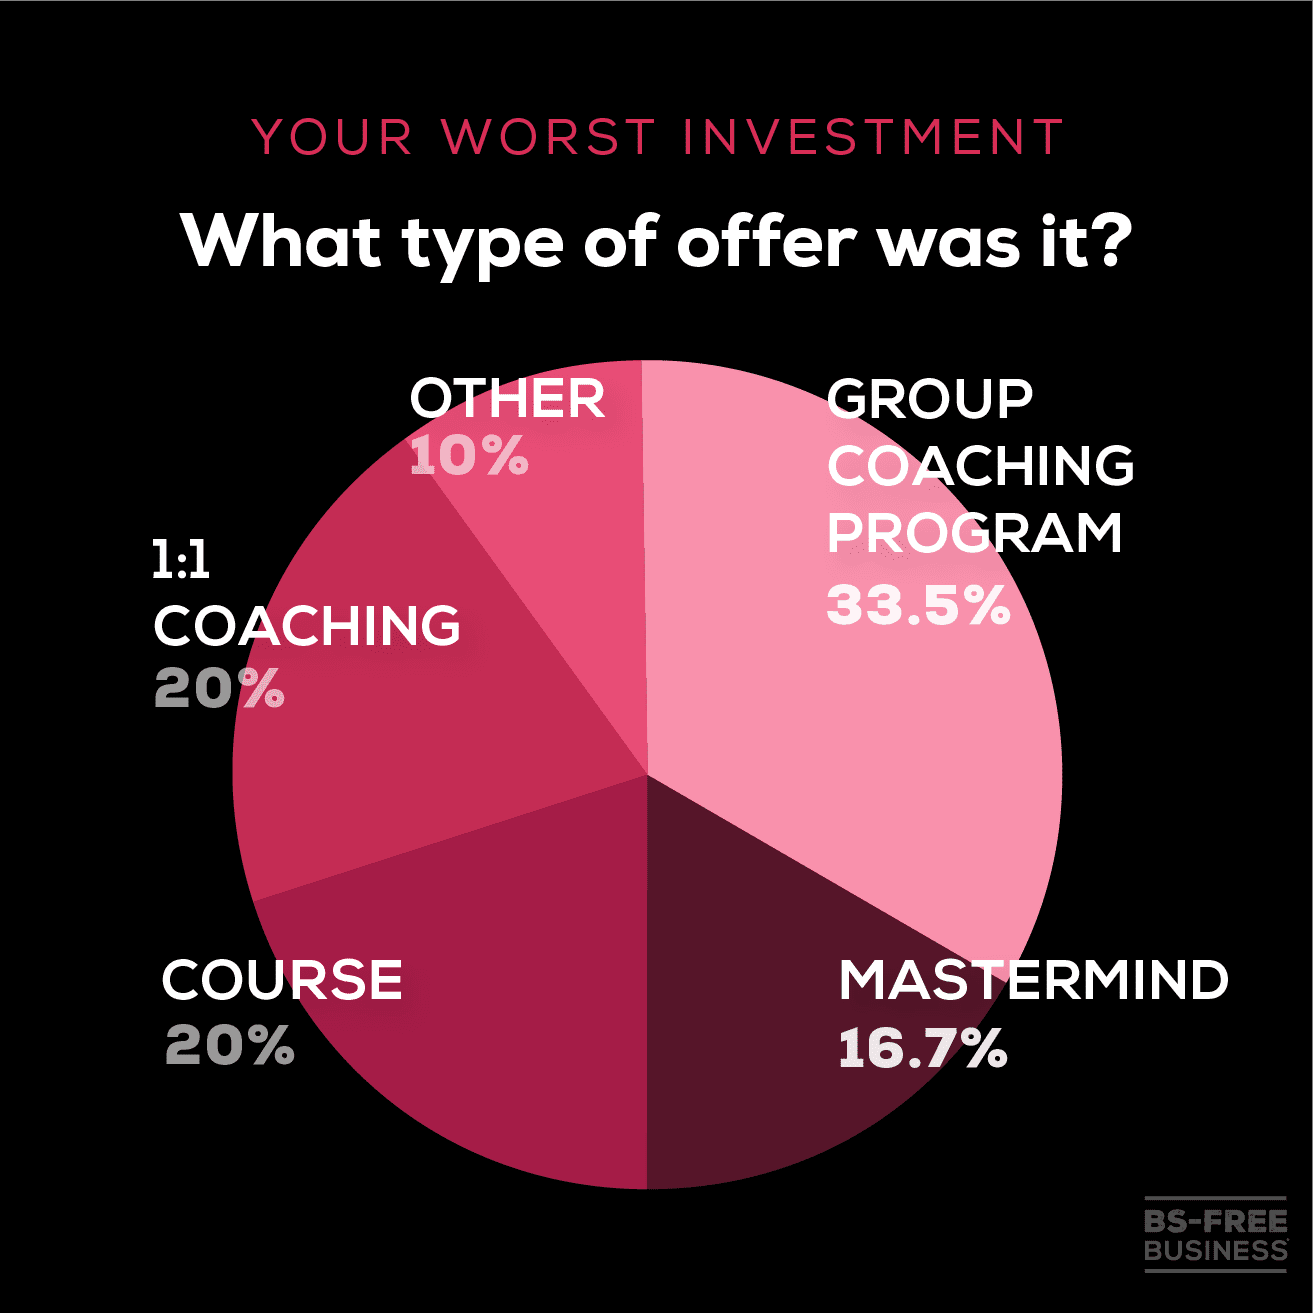 pie chart of the type of worst investment